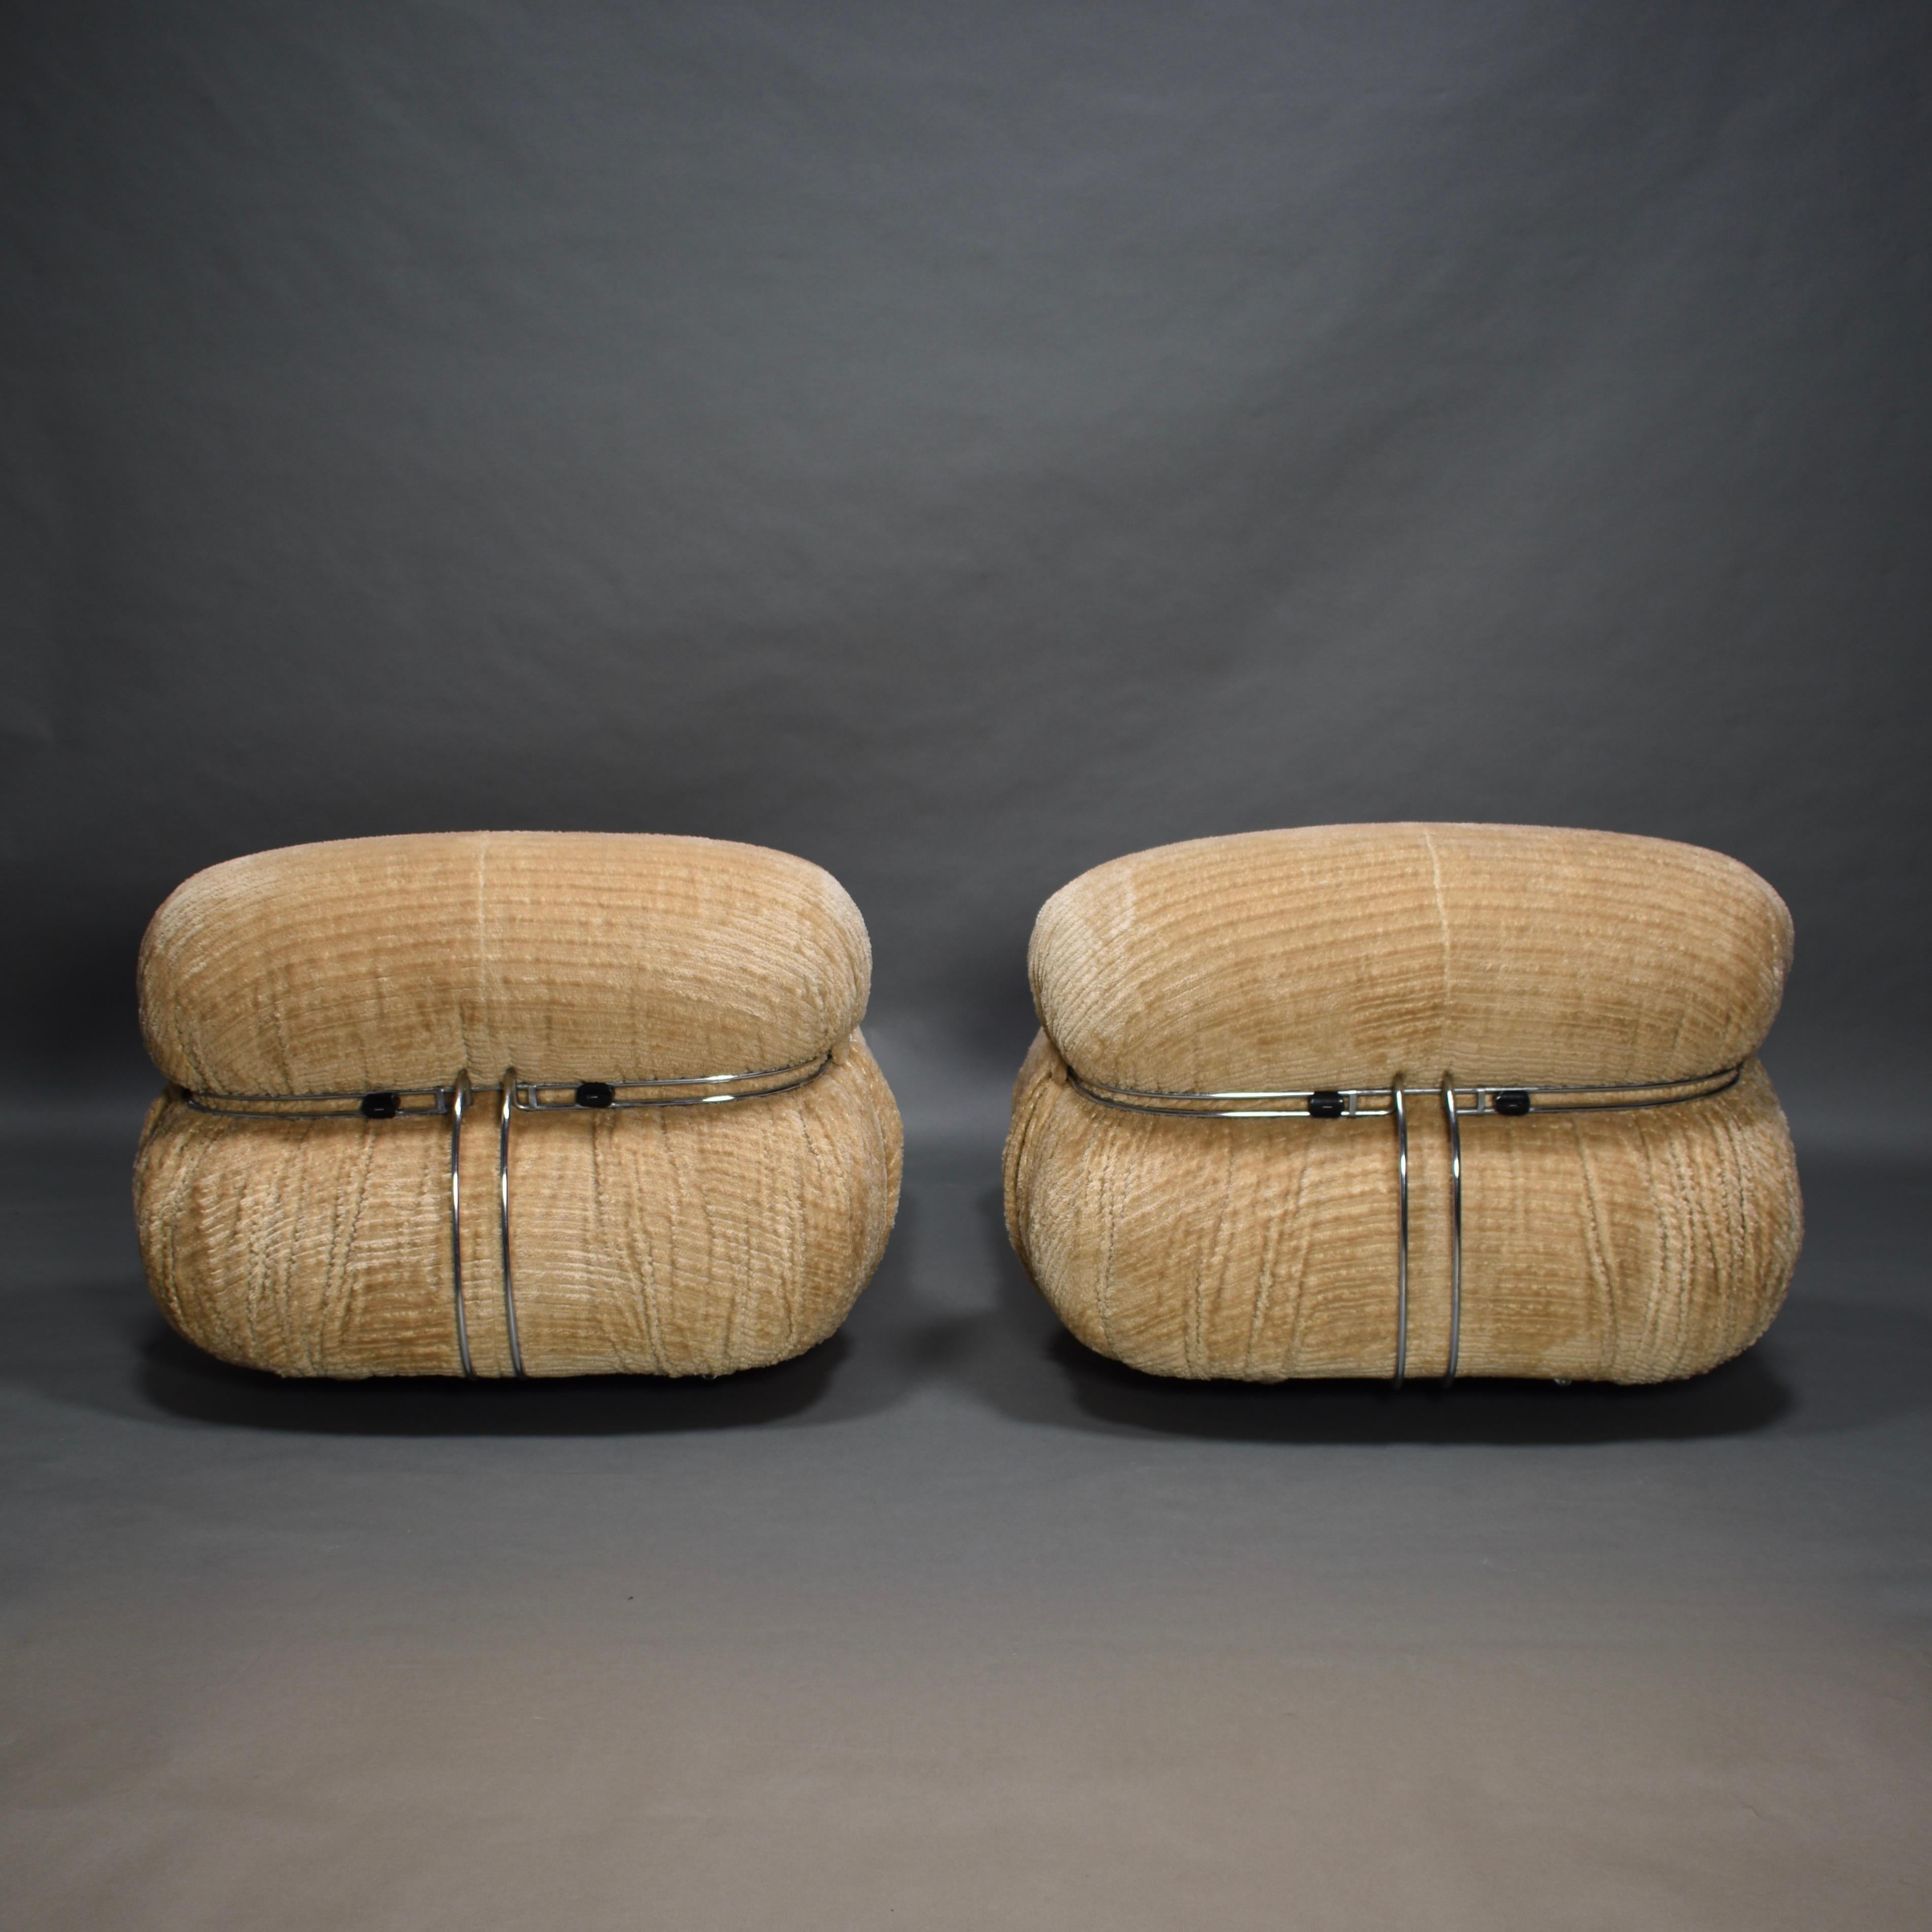 Late 20th Century Pair of Soriana Chairs by Afra and Tobia Scarpa for Cassina, Italy, circa 1970